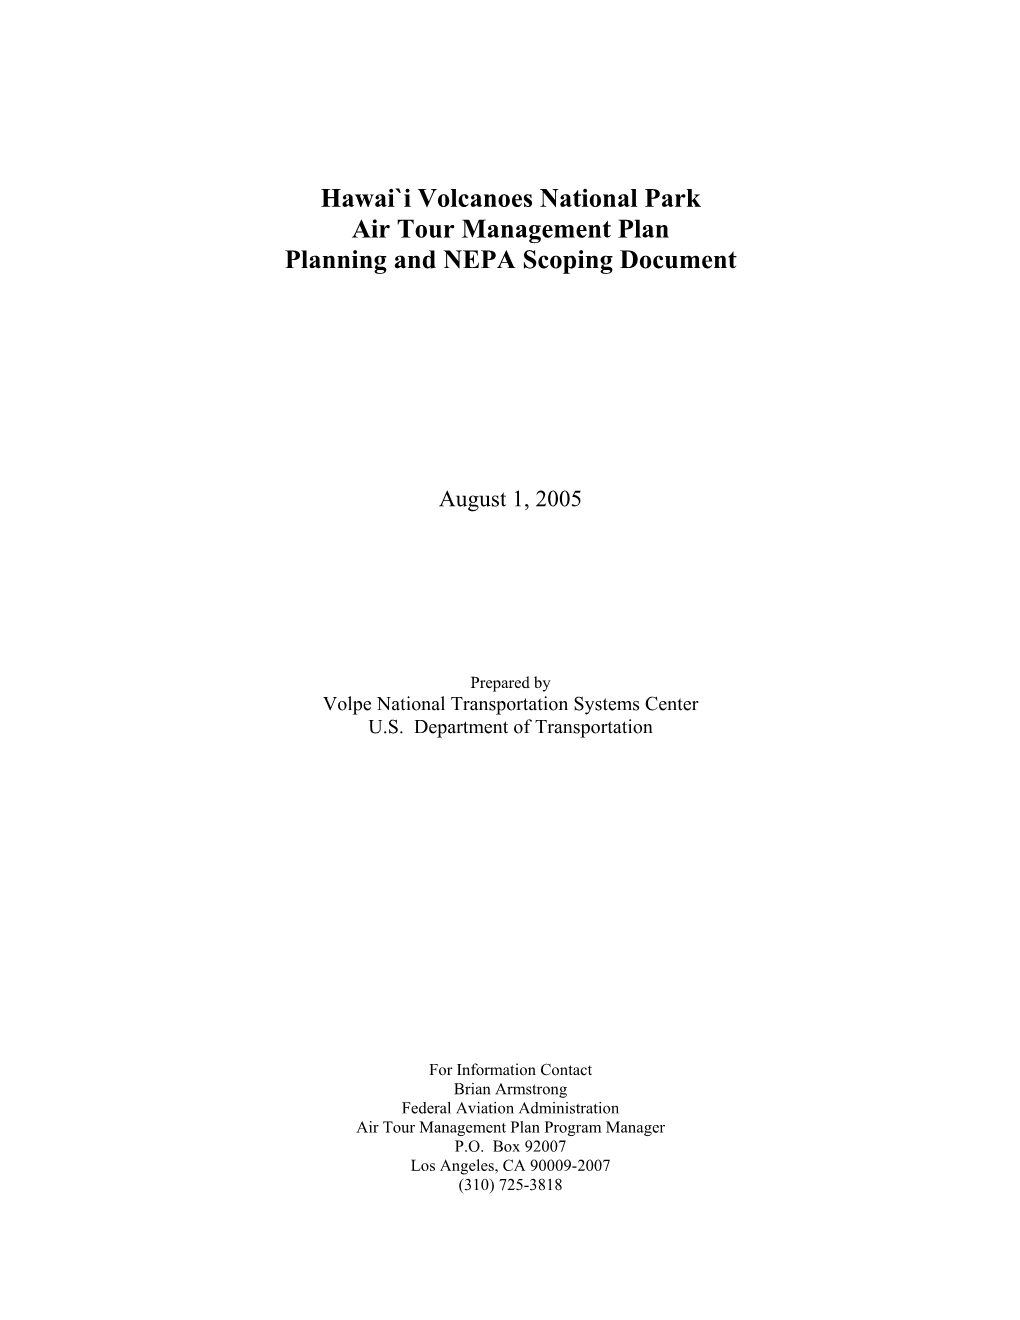 Hawai`I Volcanoes National Park Air Tour Management Plan Planning and NEPA Scoping Document